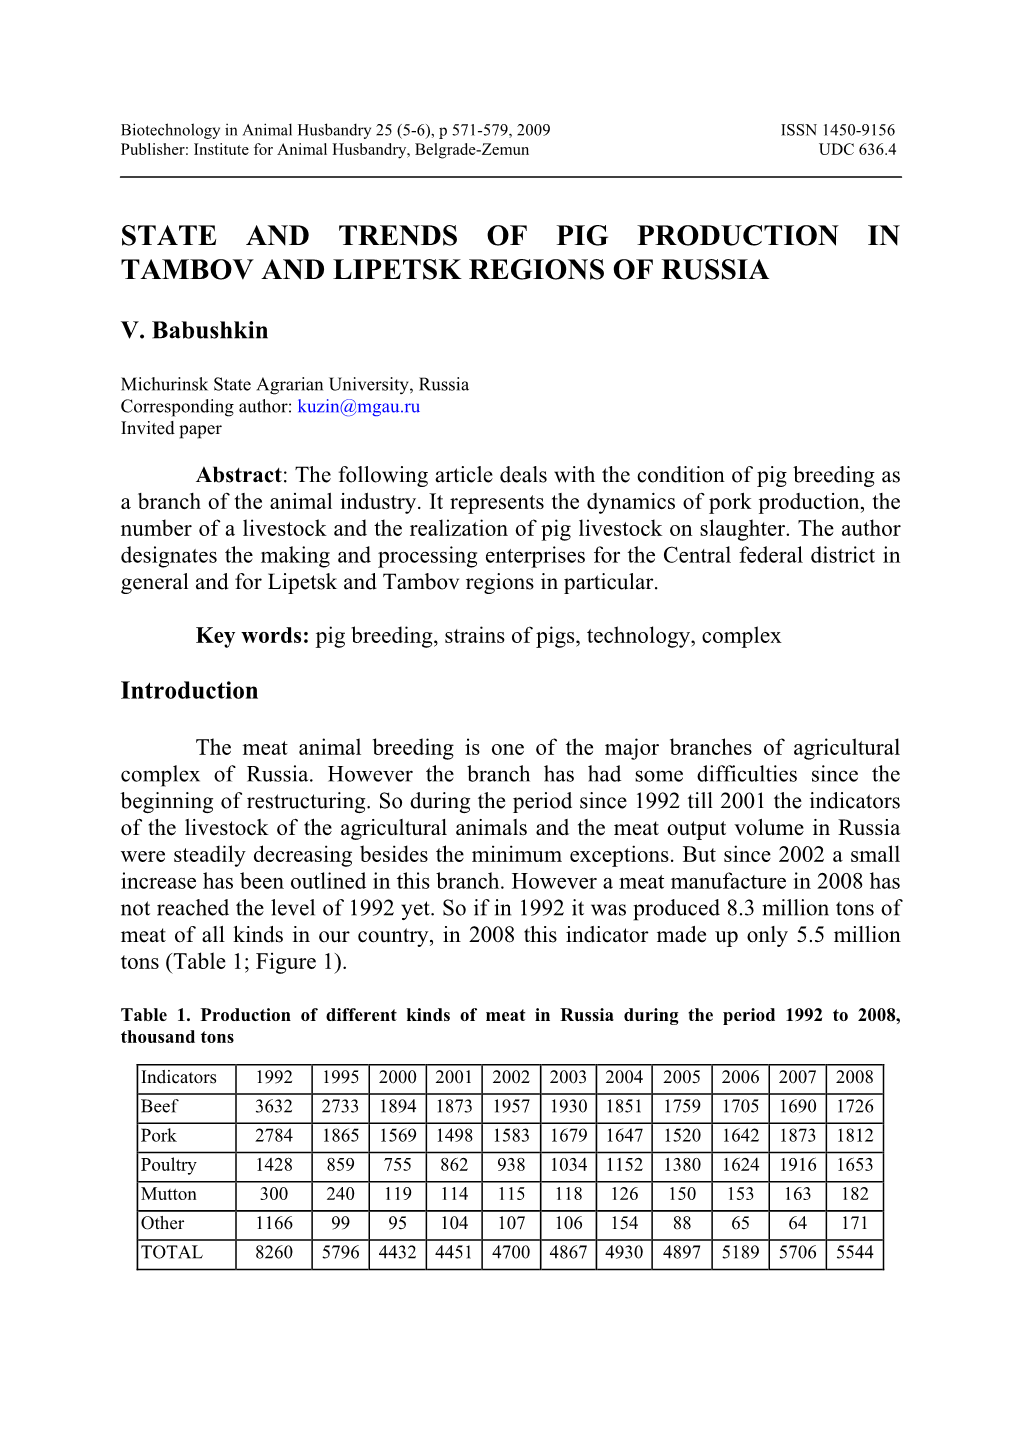 State and Trends of Pig Production in Tambov and Lipetsk Regions of Russia